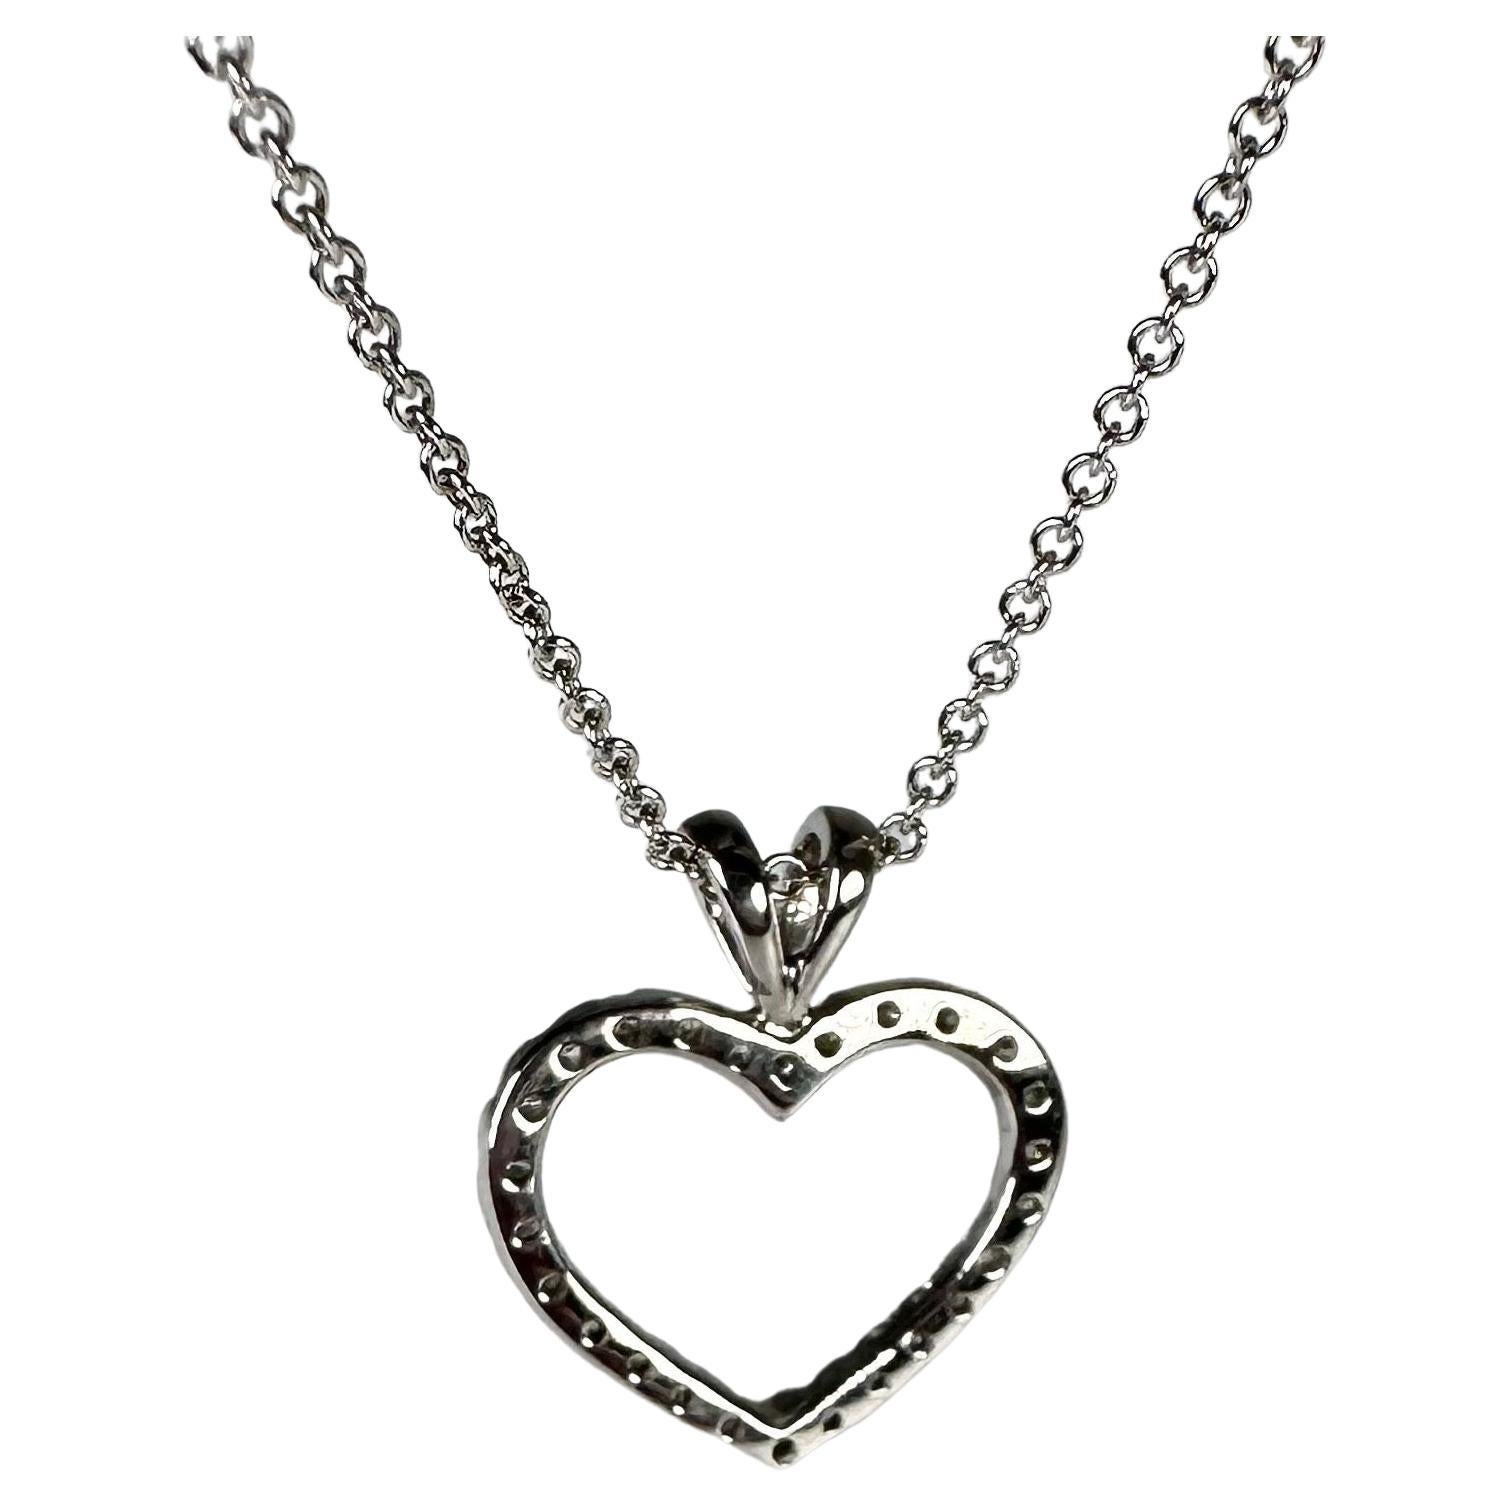 Modern large heart pendant necklace for that special someone! Amazingly crafted in 14KT white gold with 26 natural diamonds. Certified piece that will come with 18